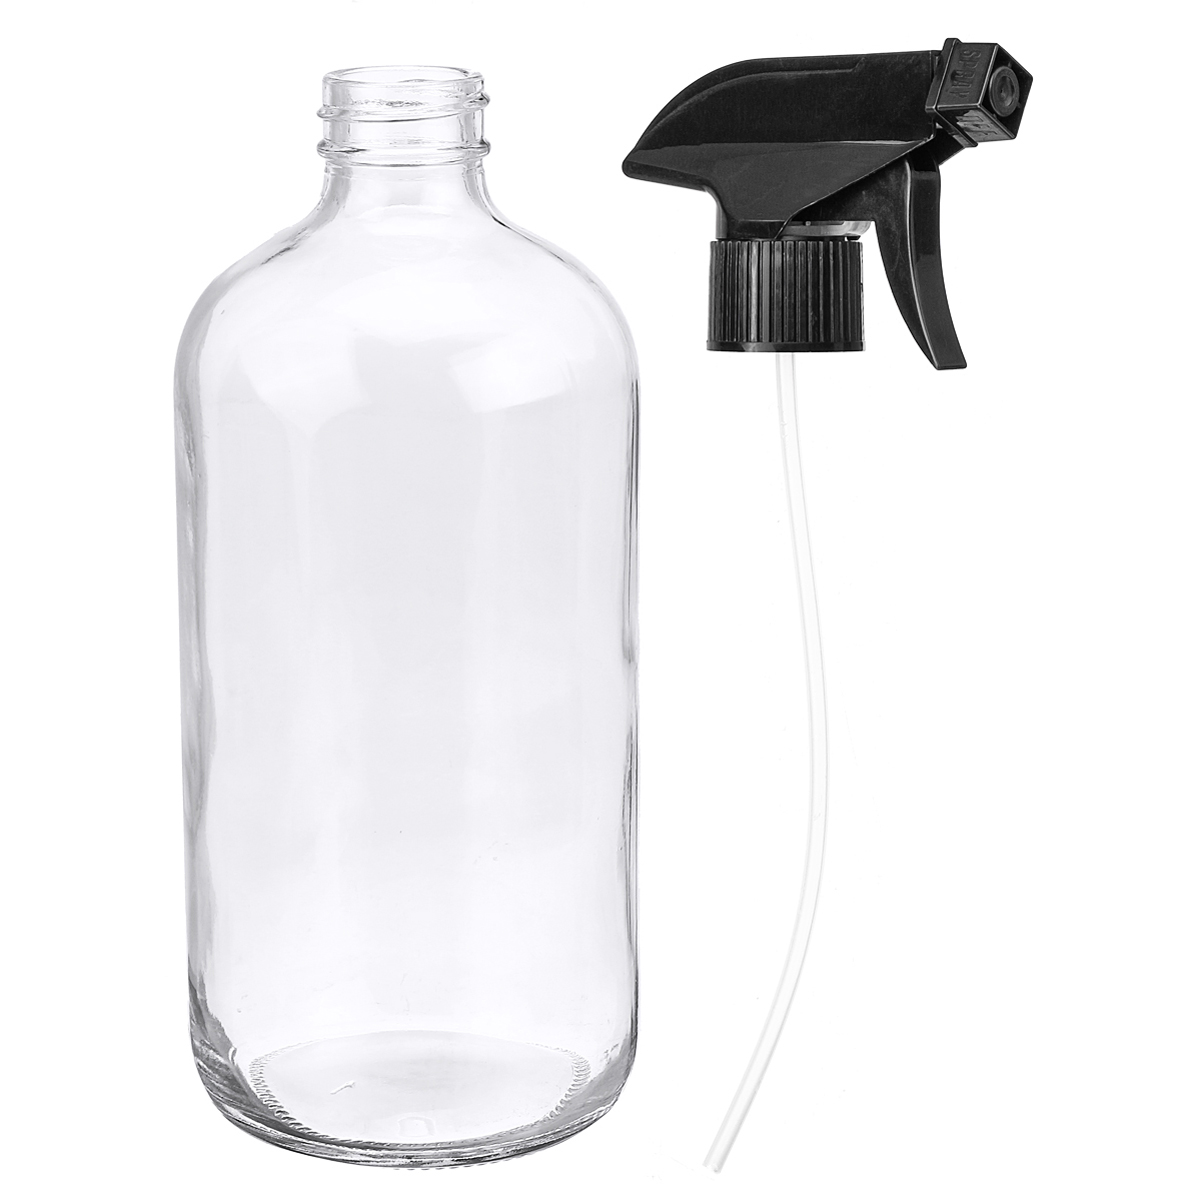 250ml500ml-Clear-Glass-Bottle-With-Trigger-Sprayer-Cap-Essential-Oil-Water-Spraying-Bottle-1690680-7